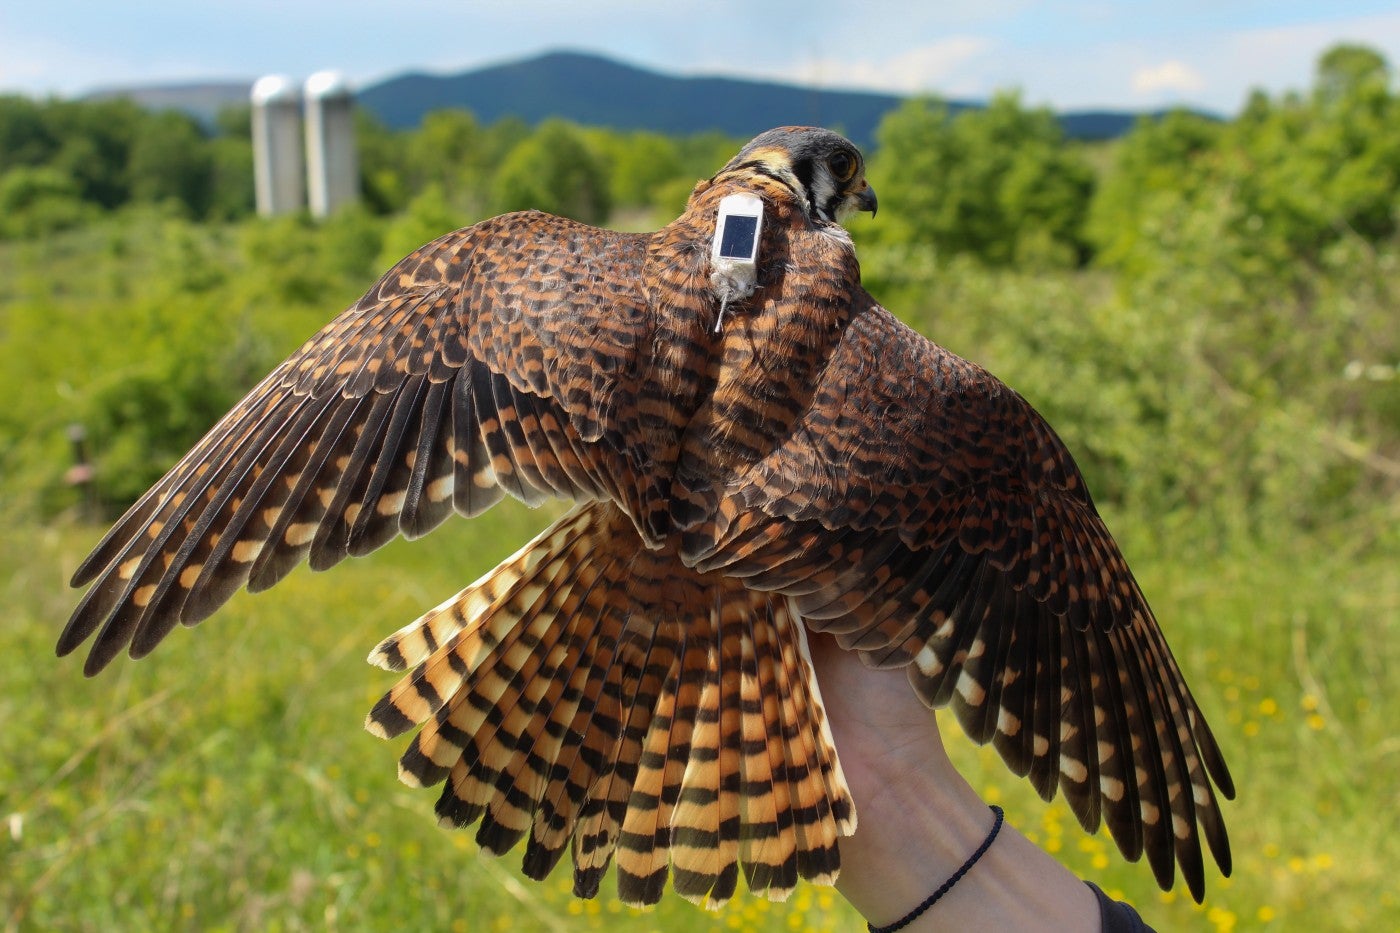 A small hawk, called a kestrel, held in a researchers hand with its wings and tail feathers spread out, and a small GPS tracker on its back